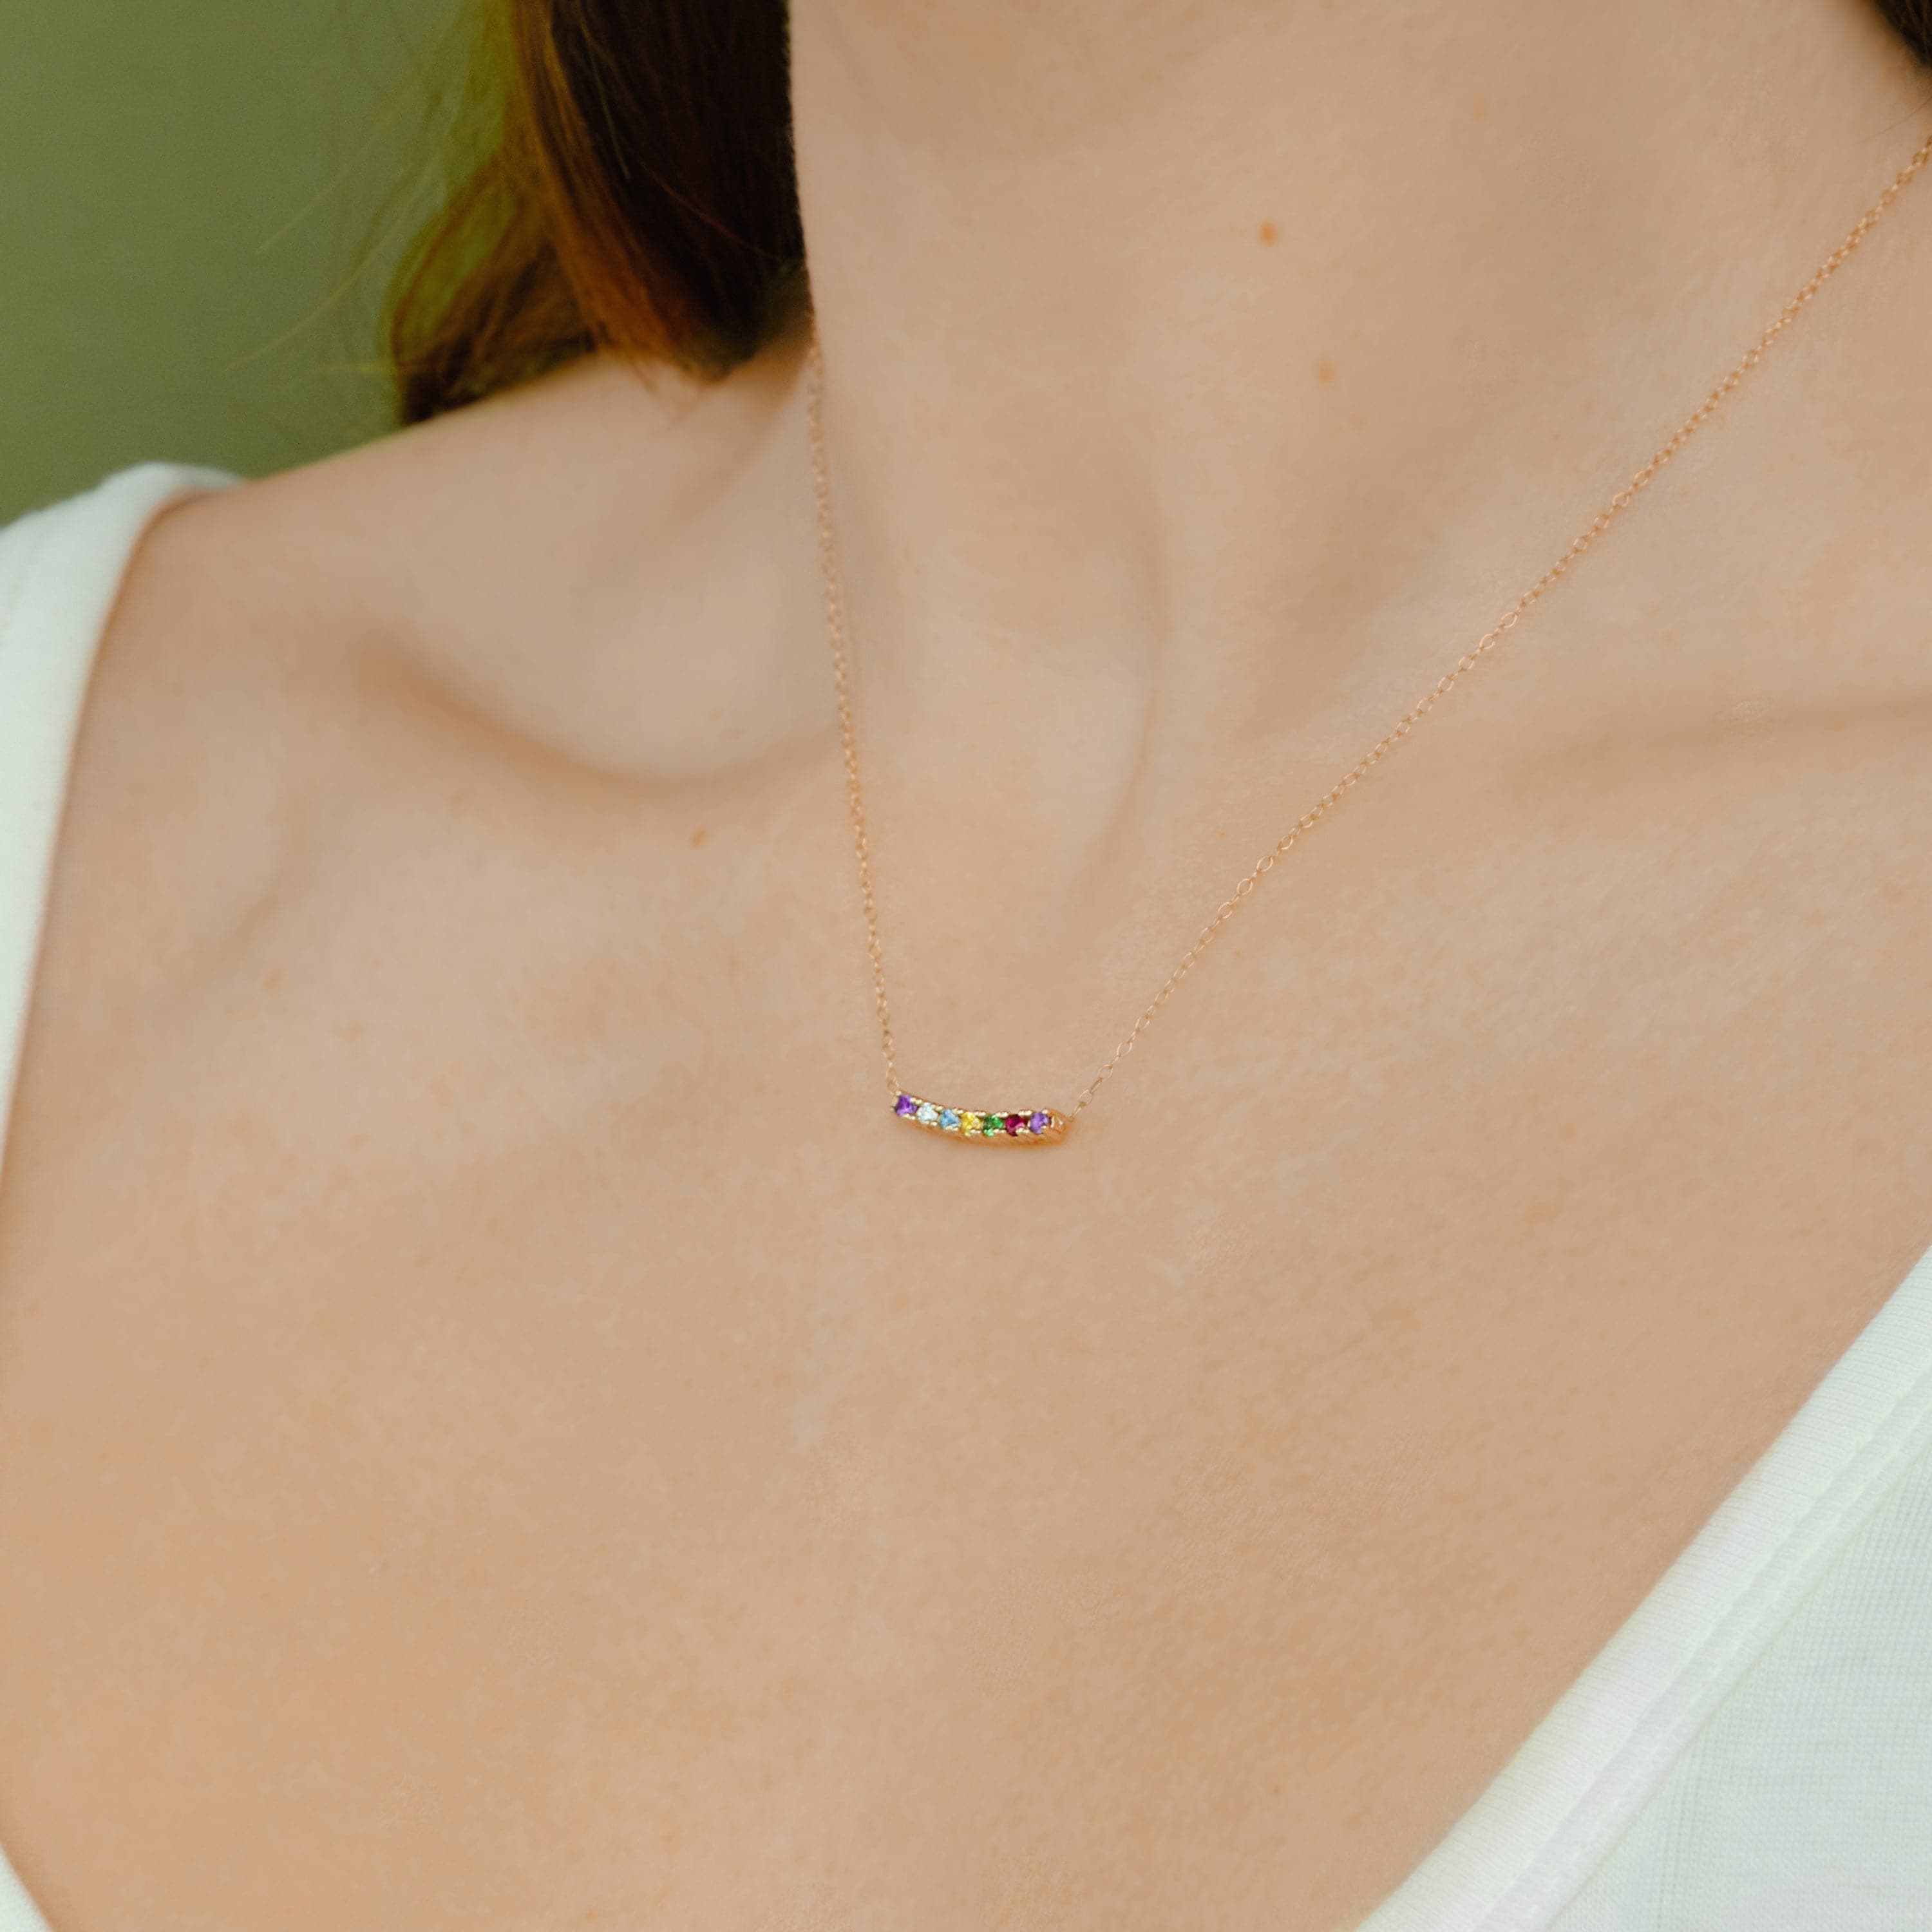 Ad Astra Rainbow Dainty Necklace 14k Solid Gold |  Necklaces - Common Era Jewelry